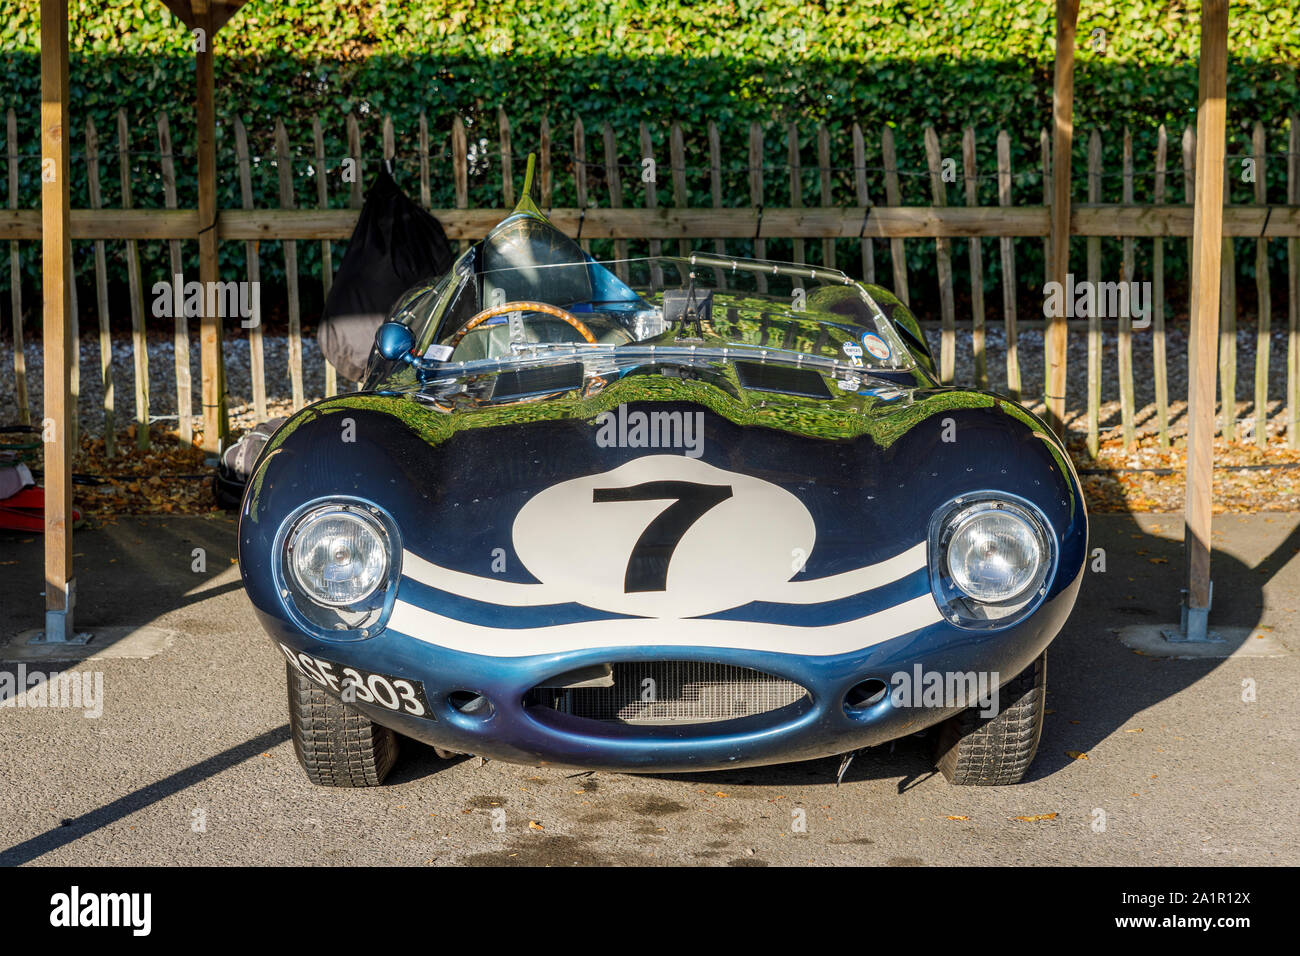 1955 Jaguar D-Type 'Long Nose' of Gary Pearson in the paddock at the 2019 Goodwood Revival, Sussex, UK. Sussex Trophy entrant. Stock Photo